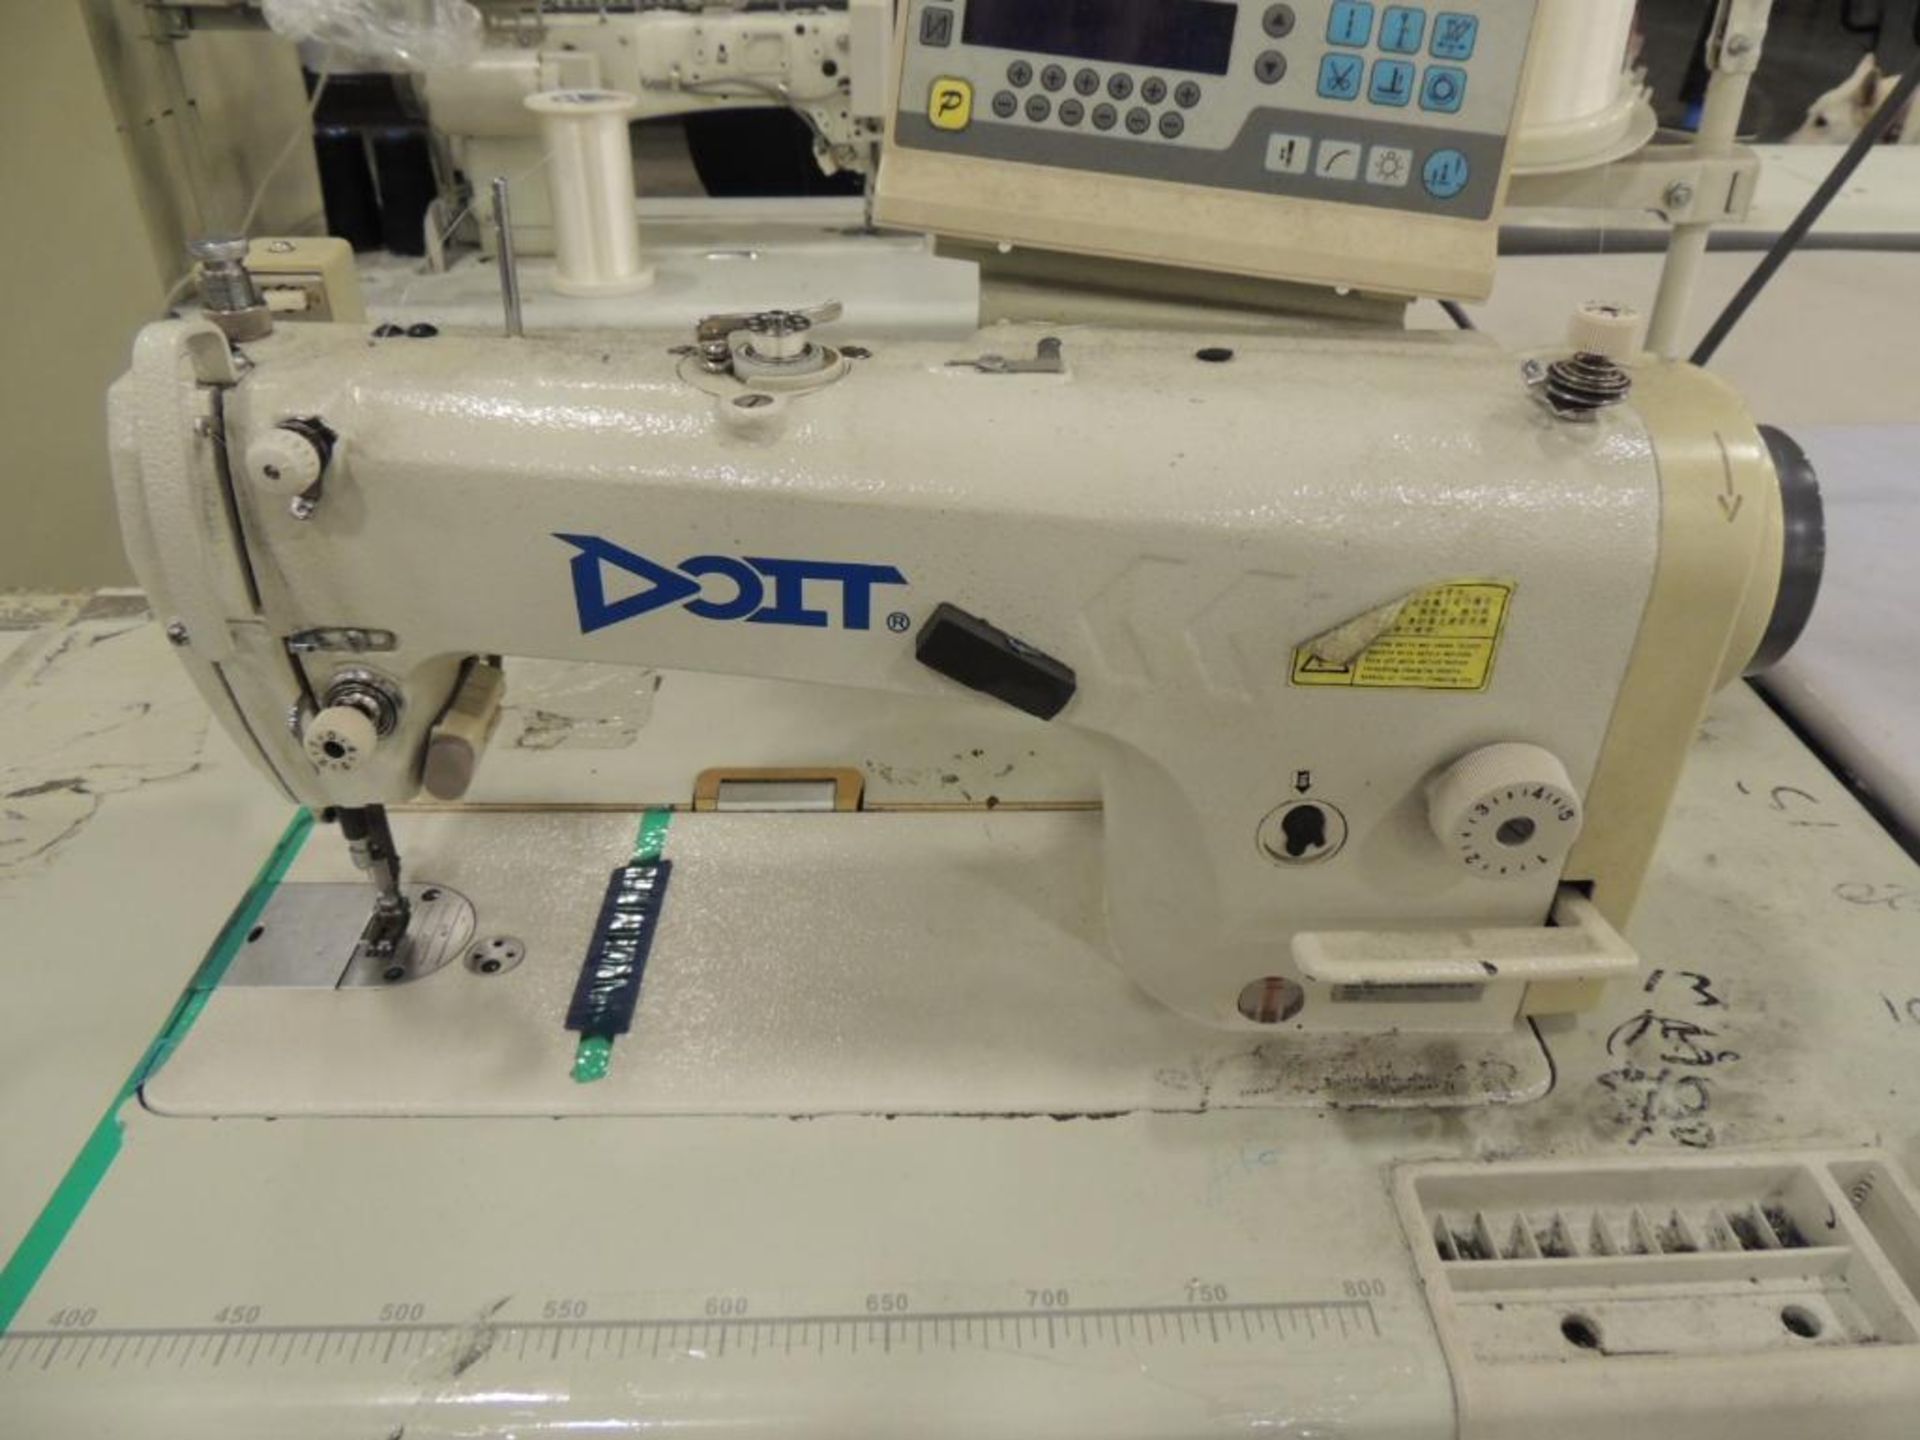 Doit DT 7200M-D4 High Speed Micro Oil Computer Lockstitch Industrial Sewing Machine, on Table